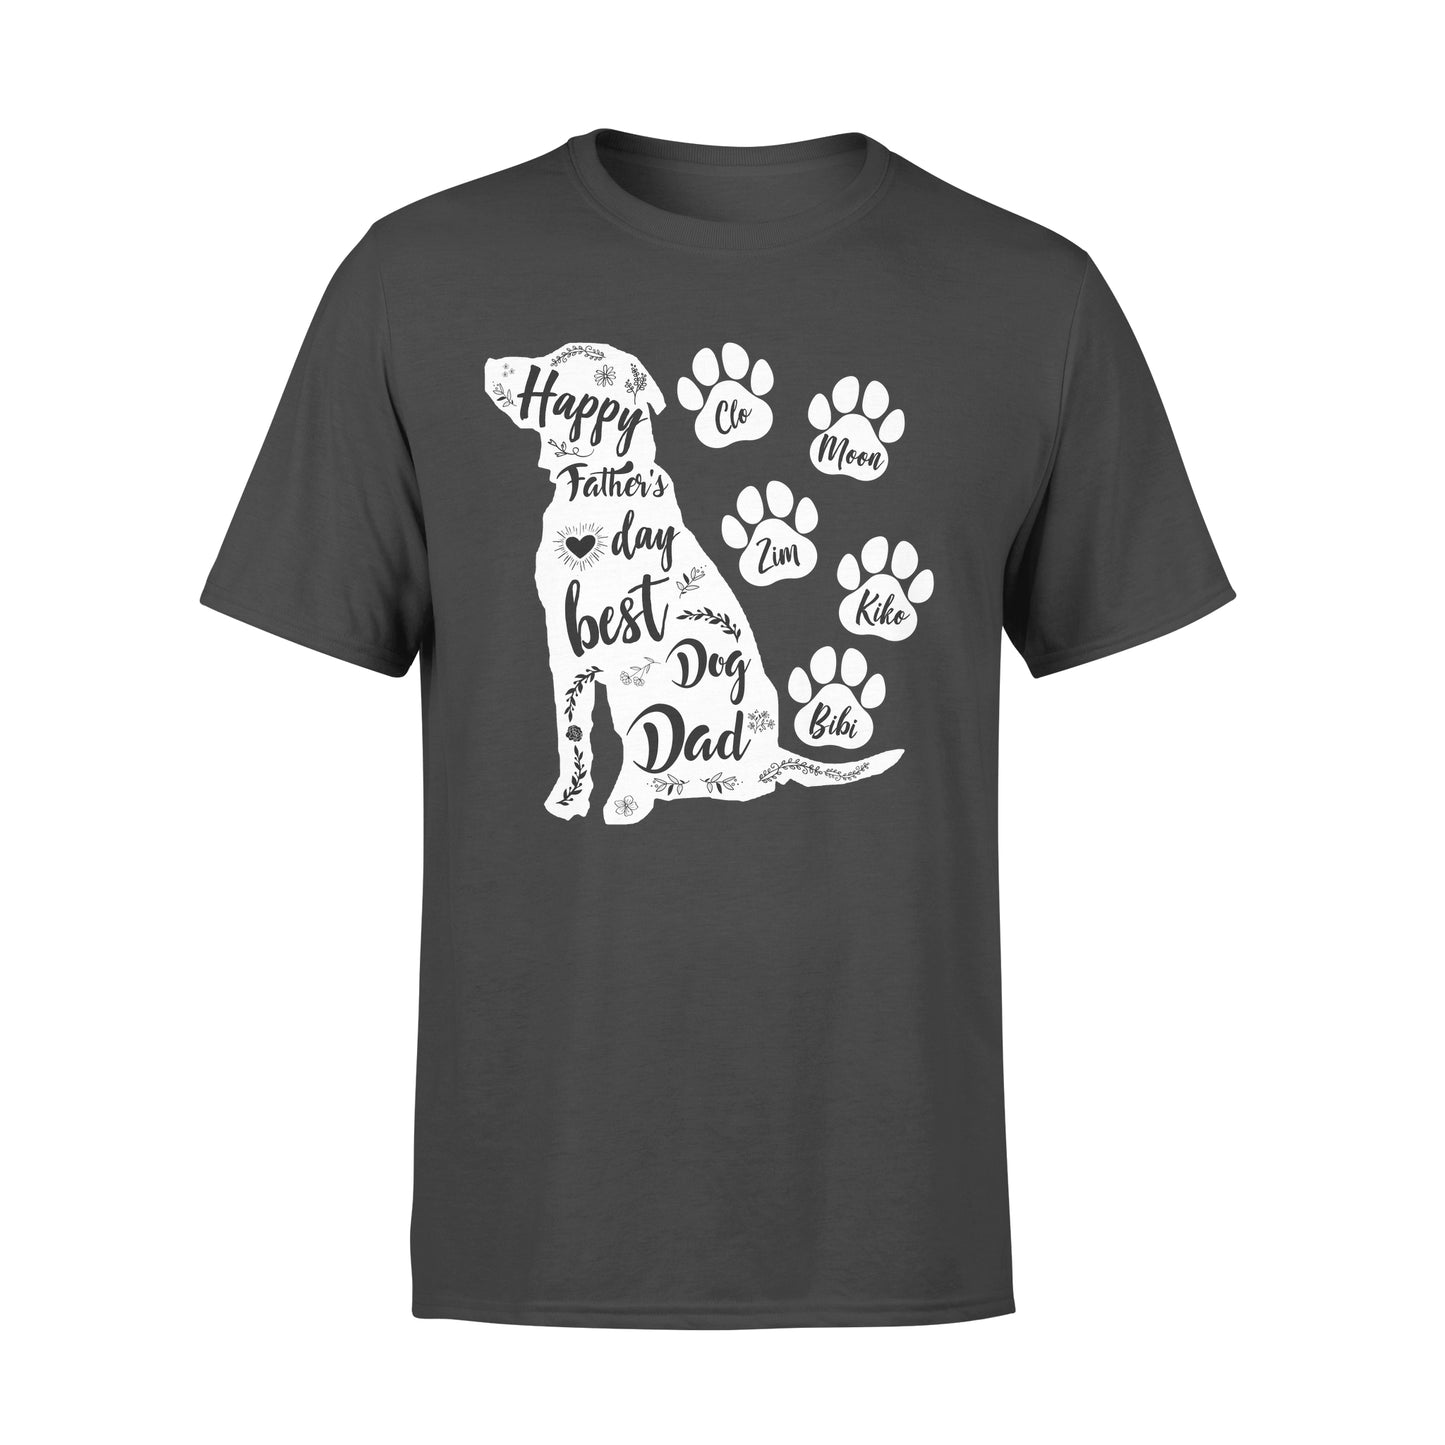 Custom Personalized Dog Dad T Shirts Gift for dog owners lovers Father of Dogs - Happy Father's Day Best Dog Dad - PersonalizedWitch